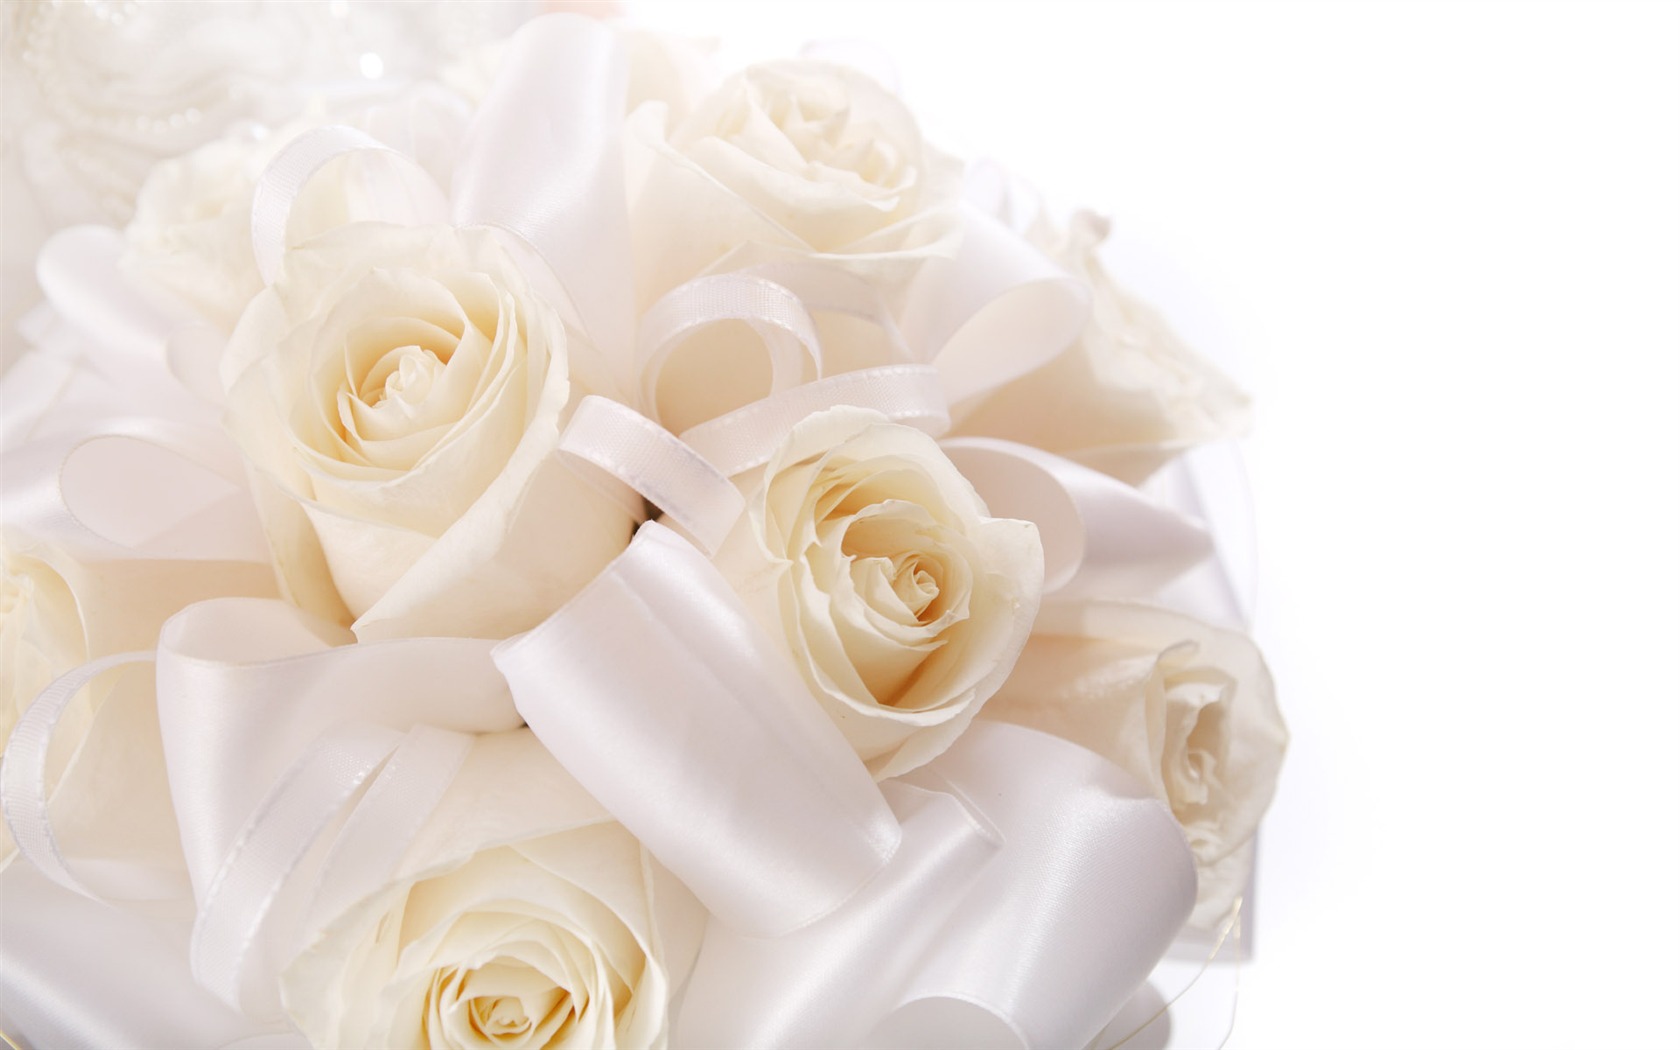 Weddings and Flowers wallpaper (1) #4 - 1680x1050